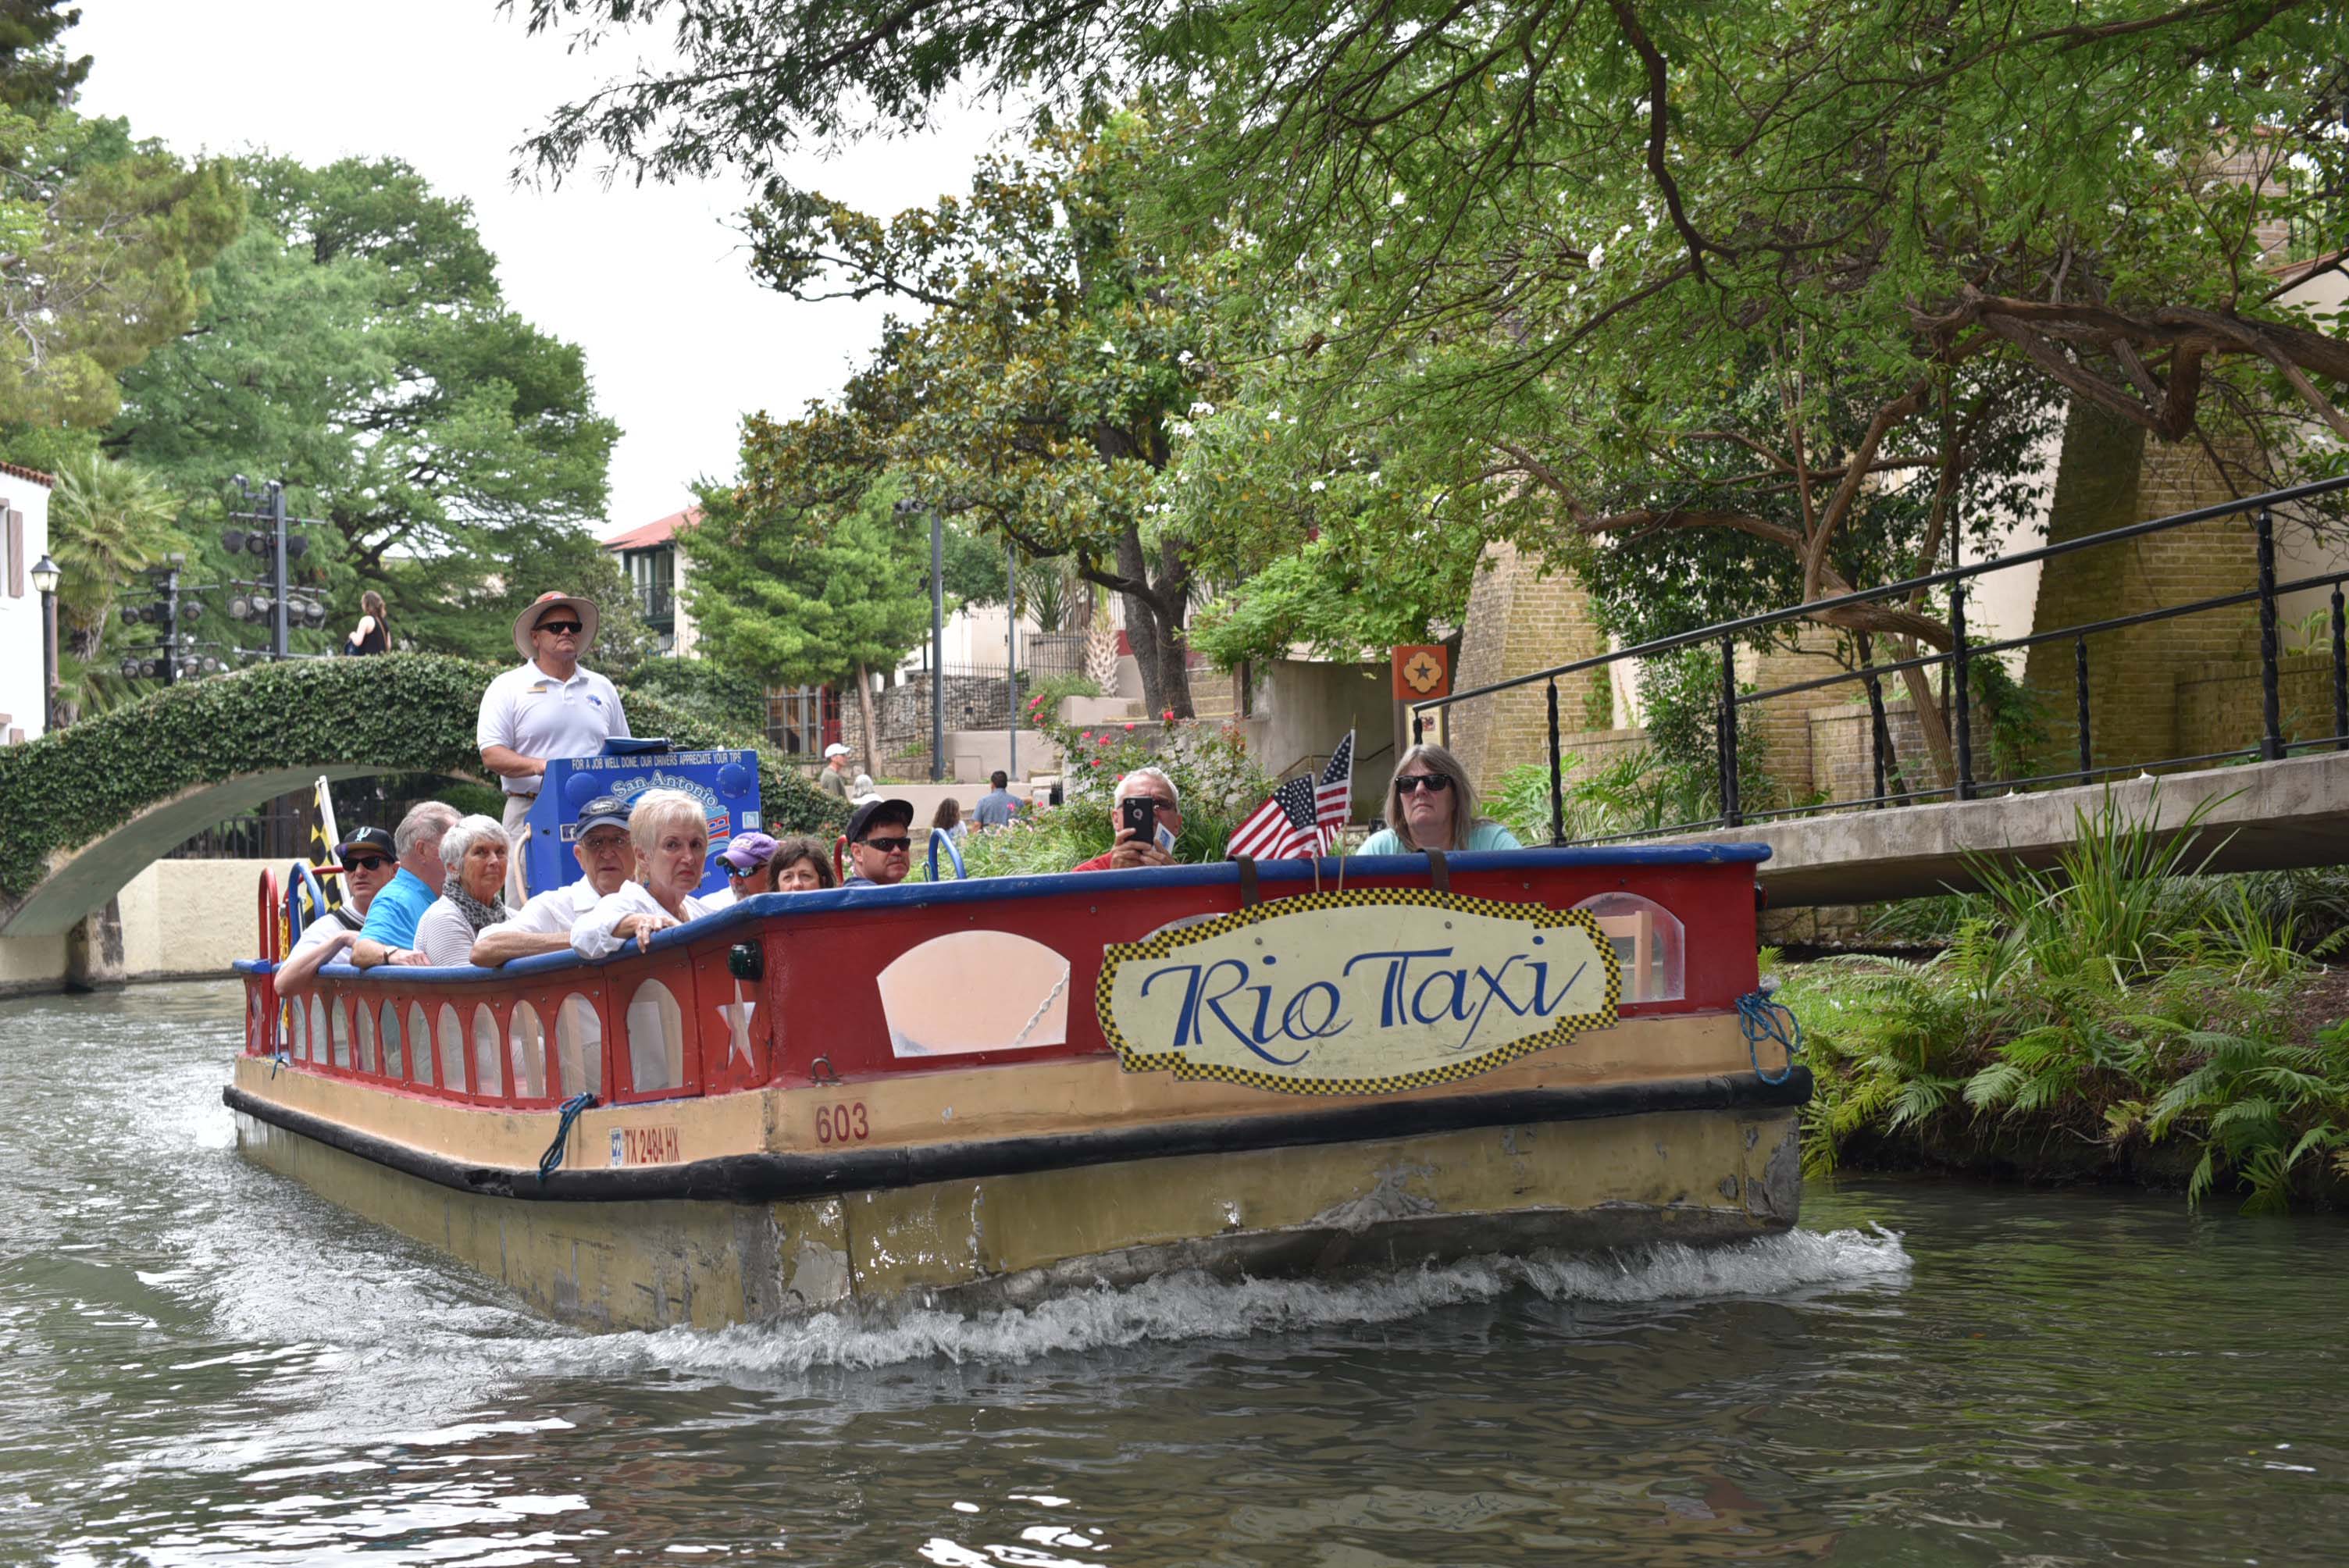 Boat tours in San Antonio : See the post for planning a weekend trip to San Antonio